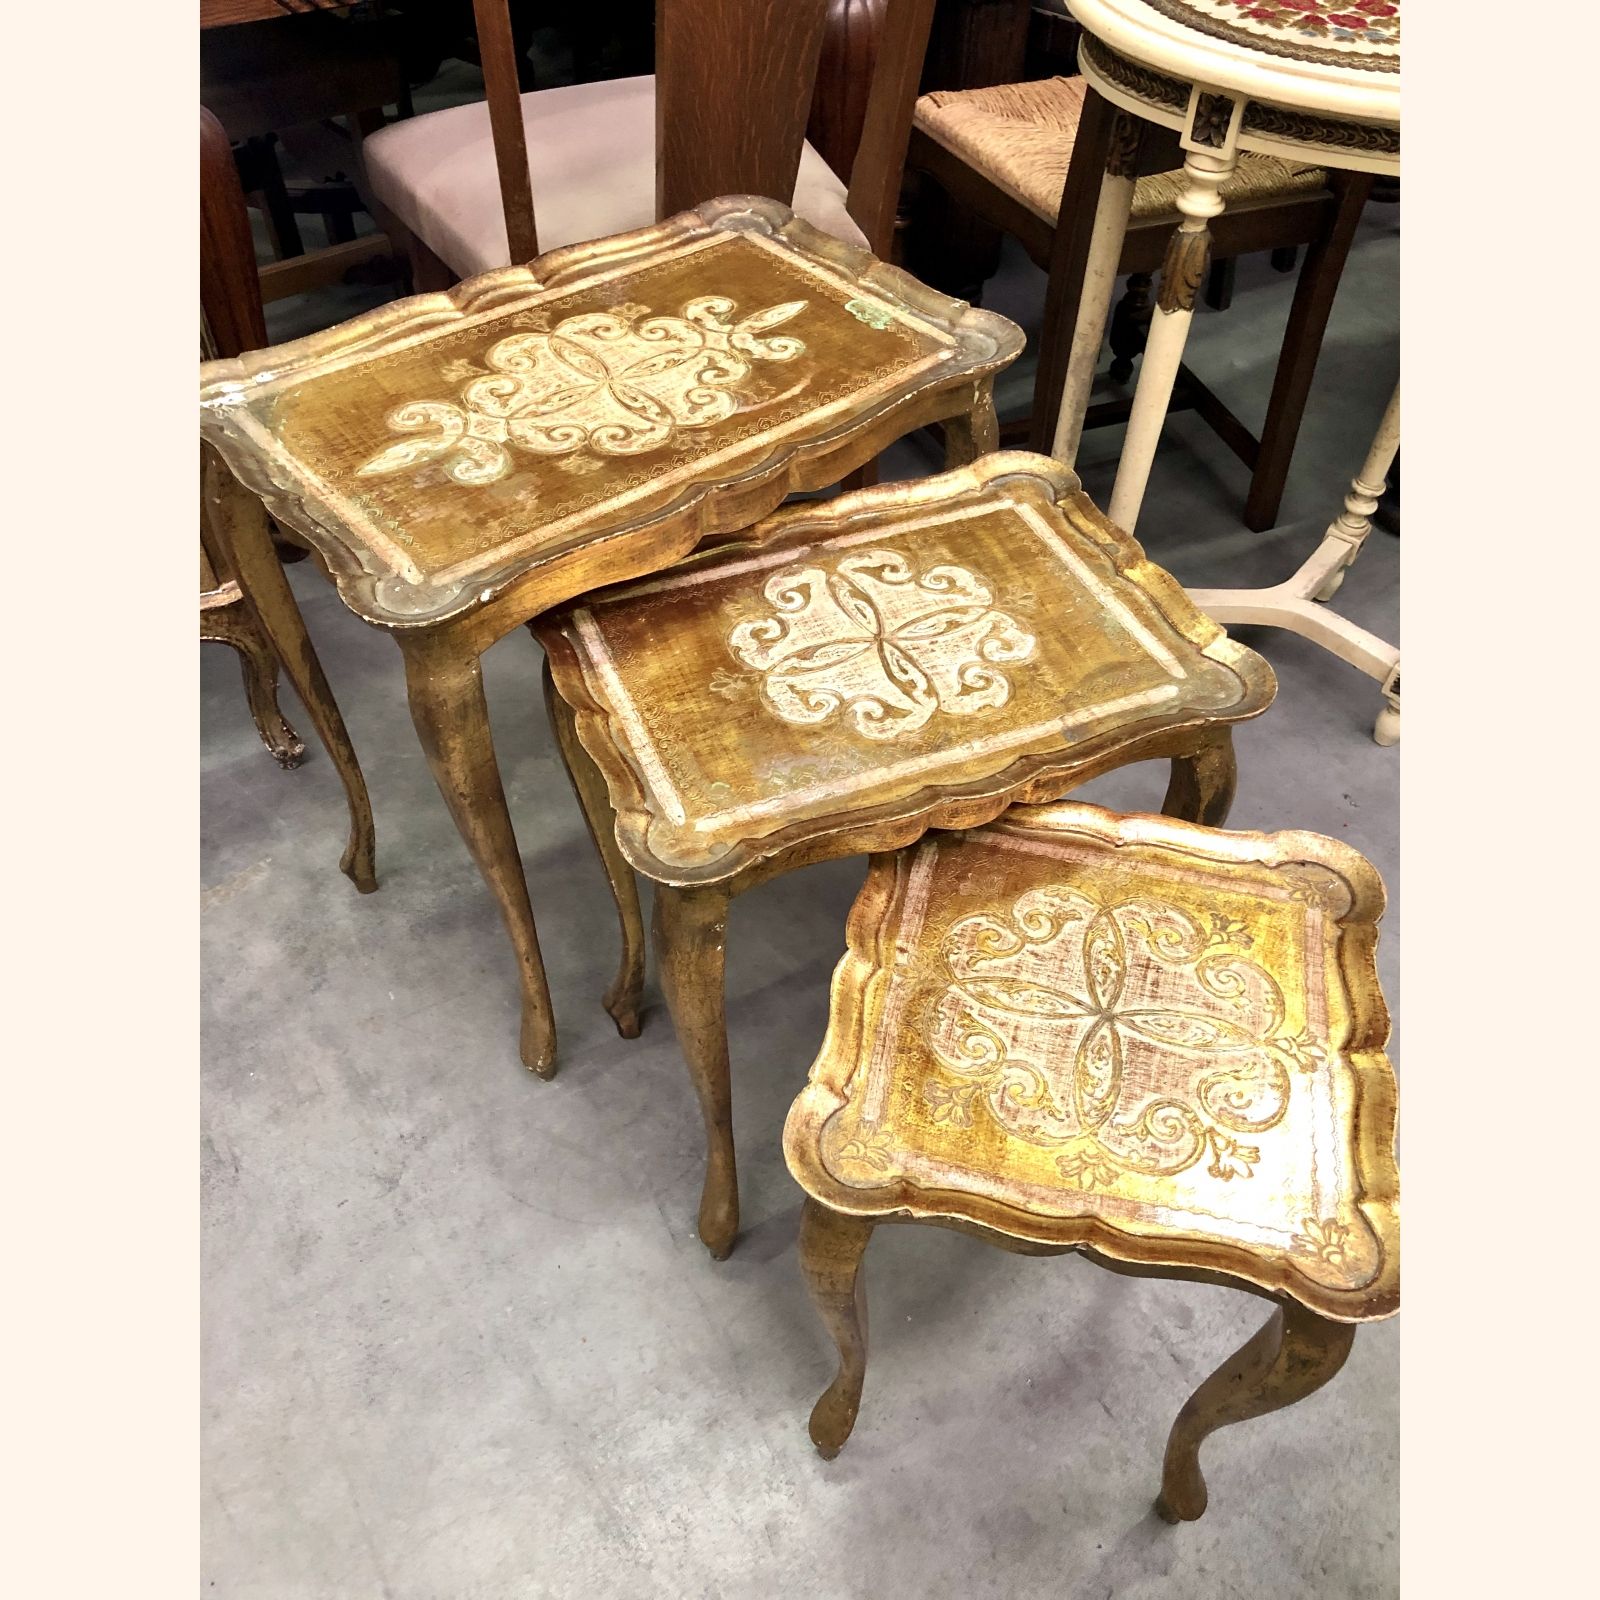 Marvellous Nest Of Antique Gold Leaf Tables (View 11 of 20)